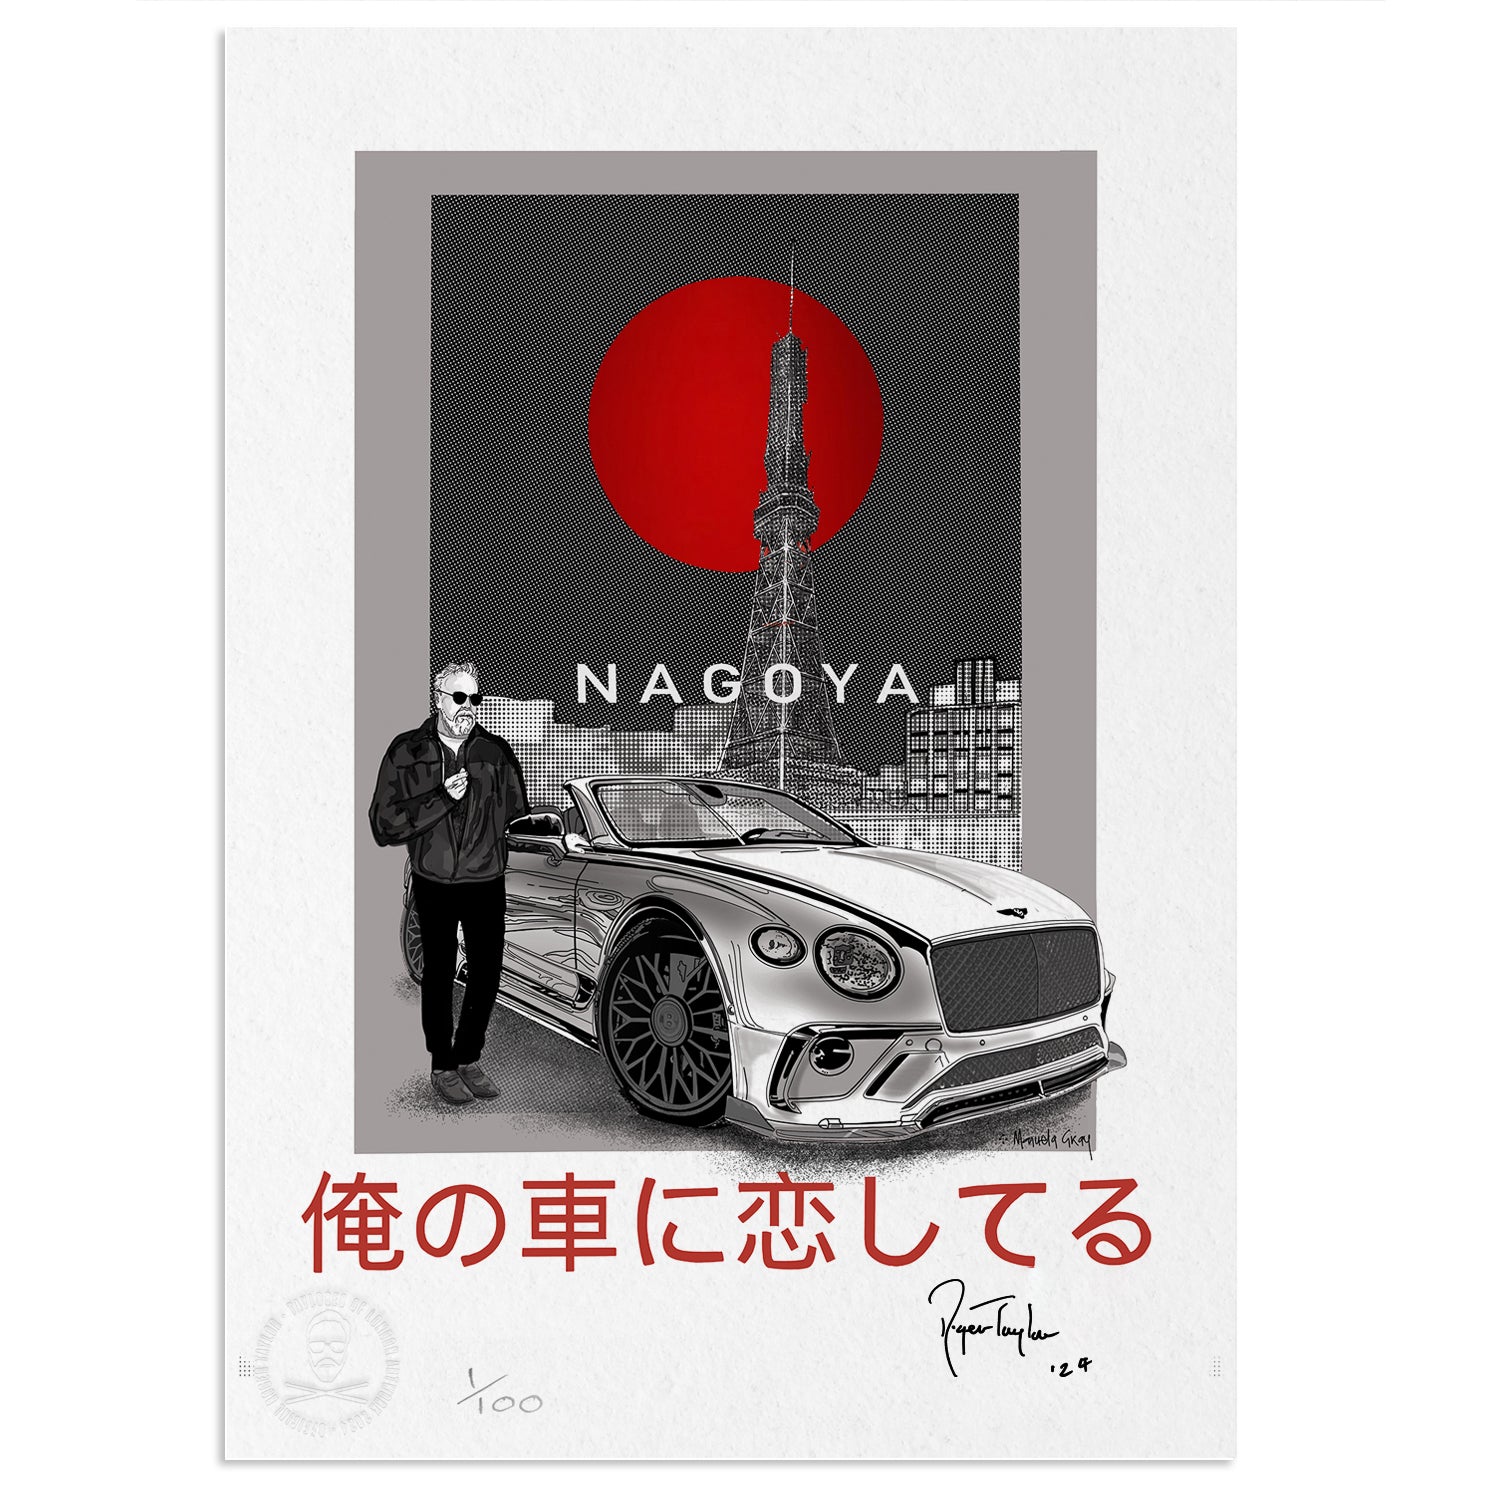 Roger Taylor - Limited Edition Japanese A1 Signed Collectors Lithograph 'NAGOYA'